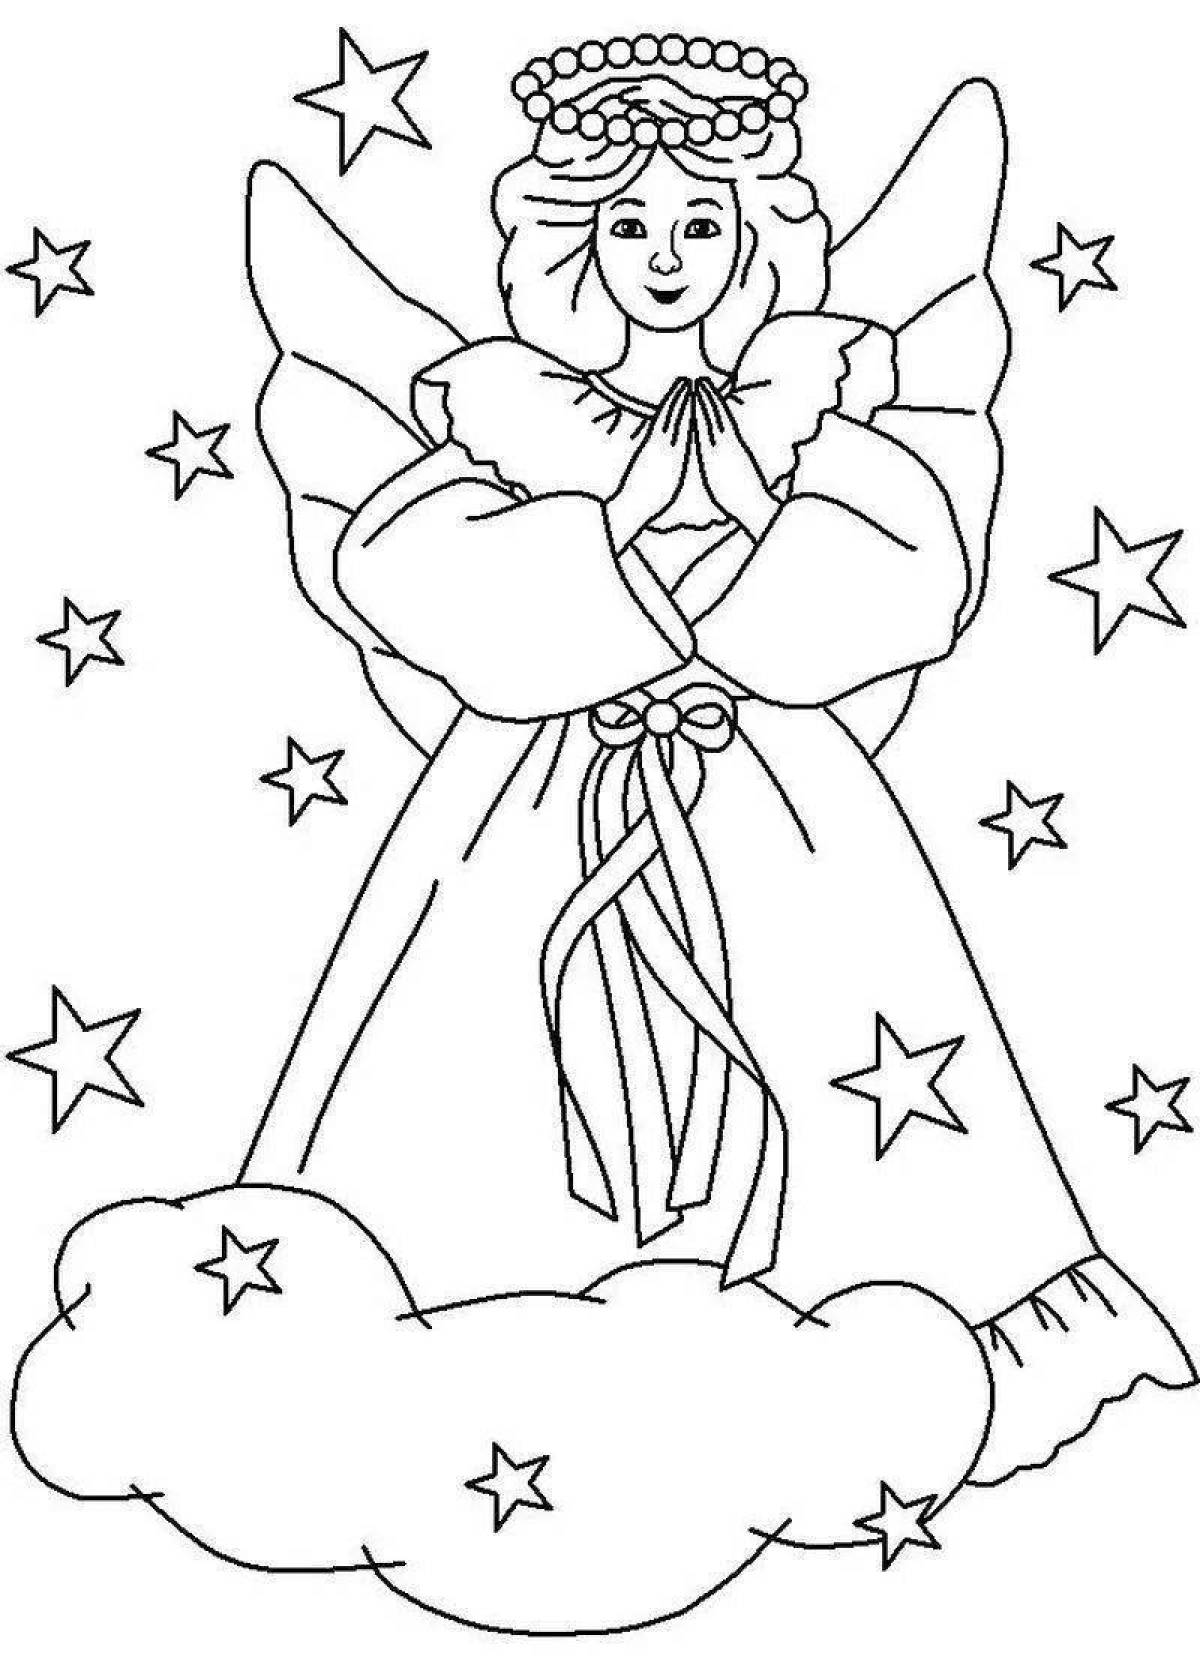 Shiny Christmas coloring book for 5-6 year olds